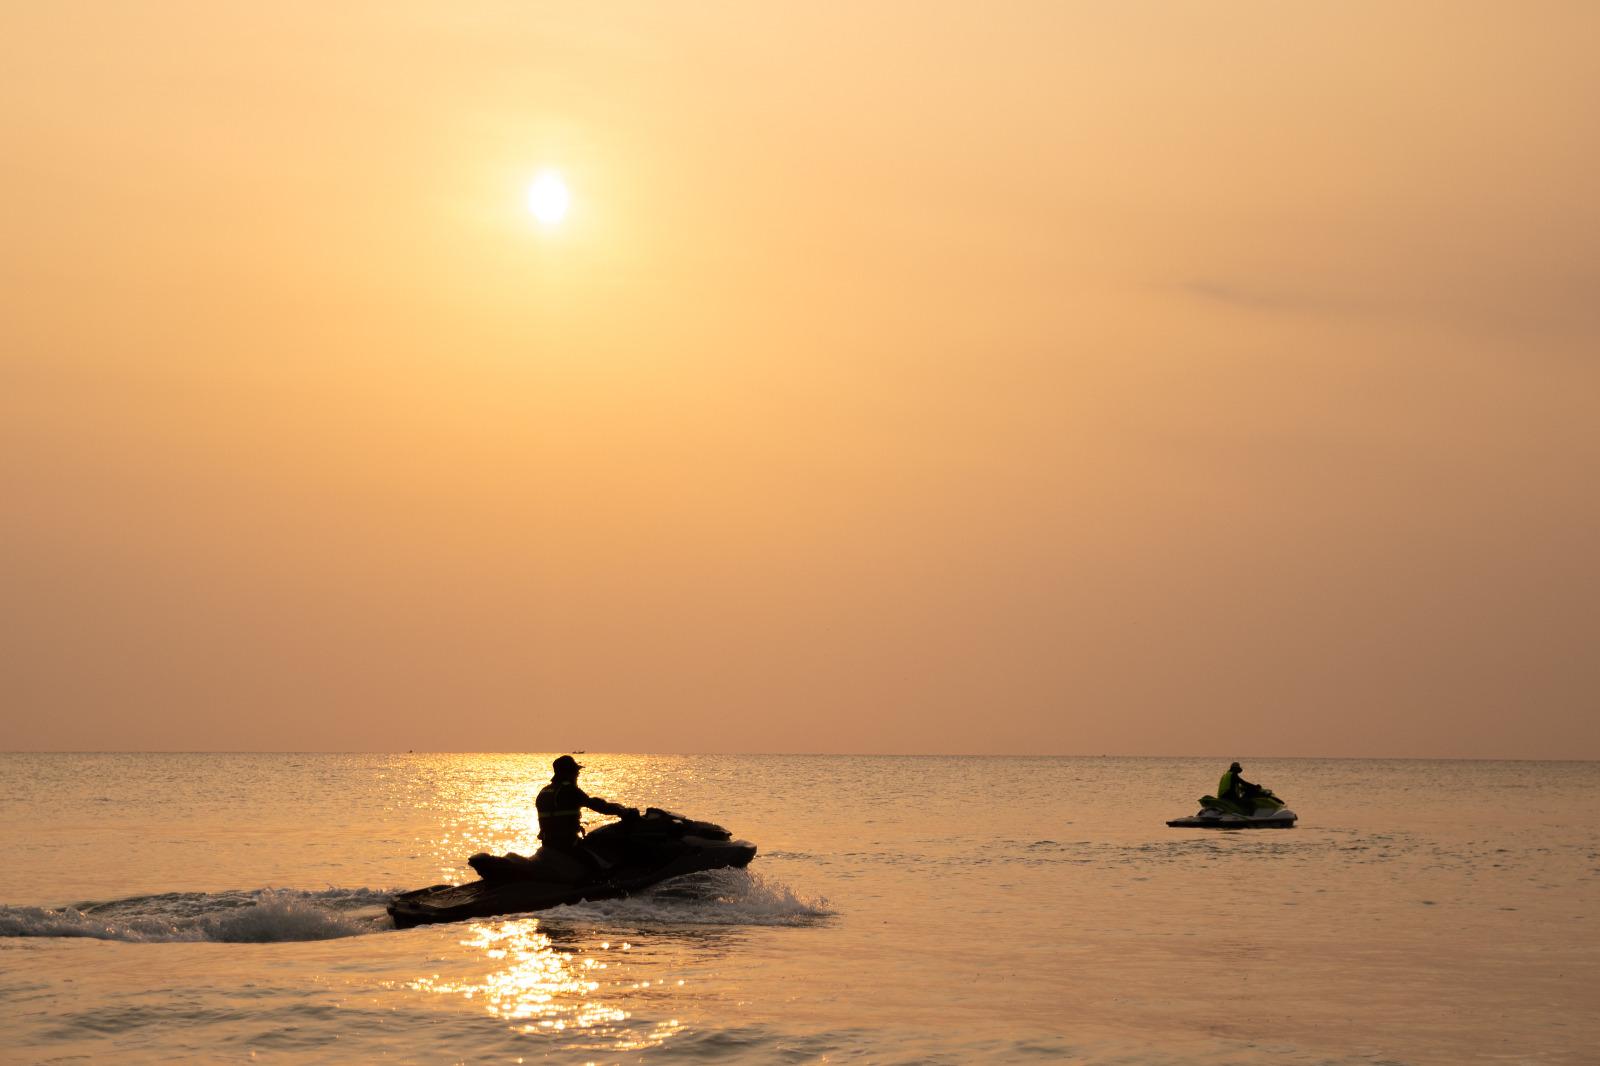 A Man riding a Jetski in the ocean